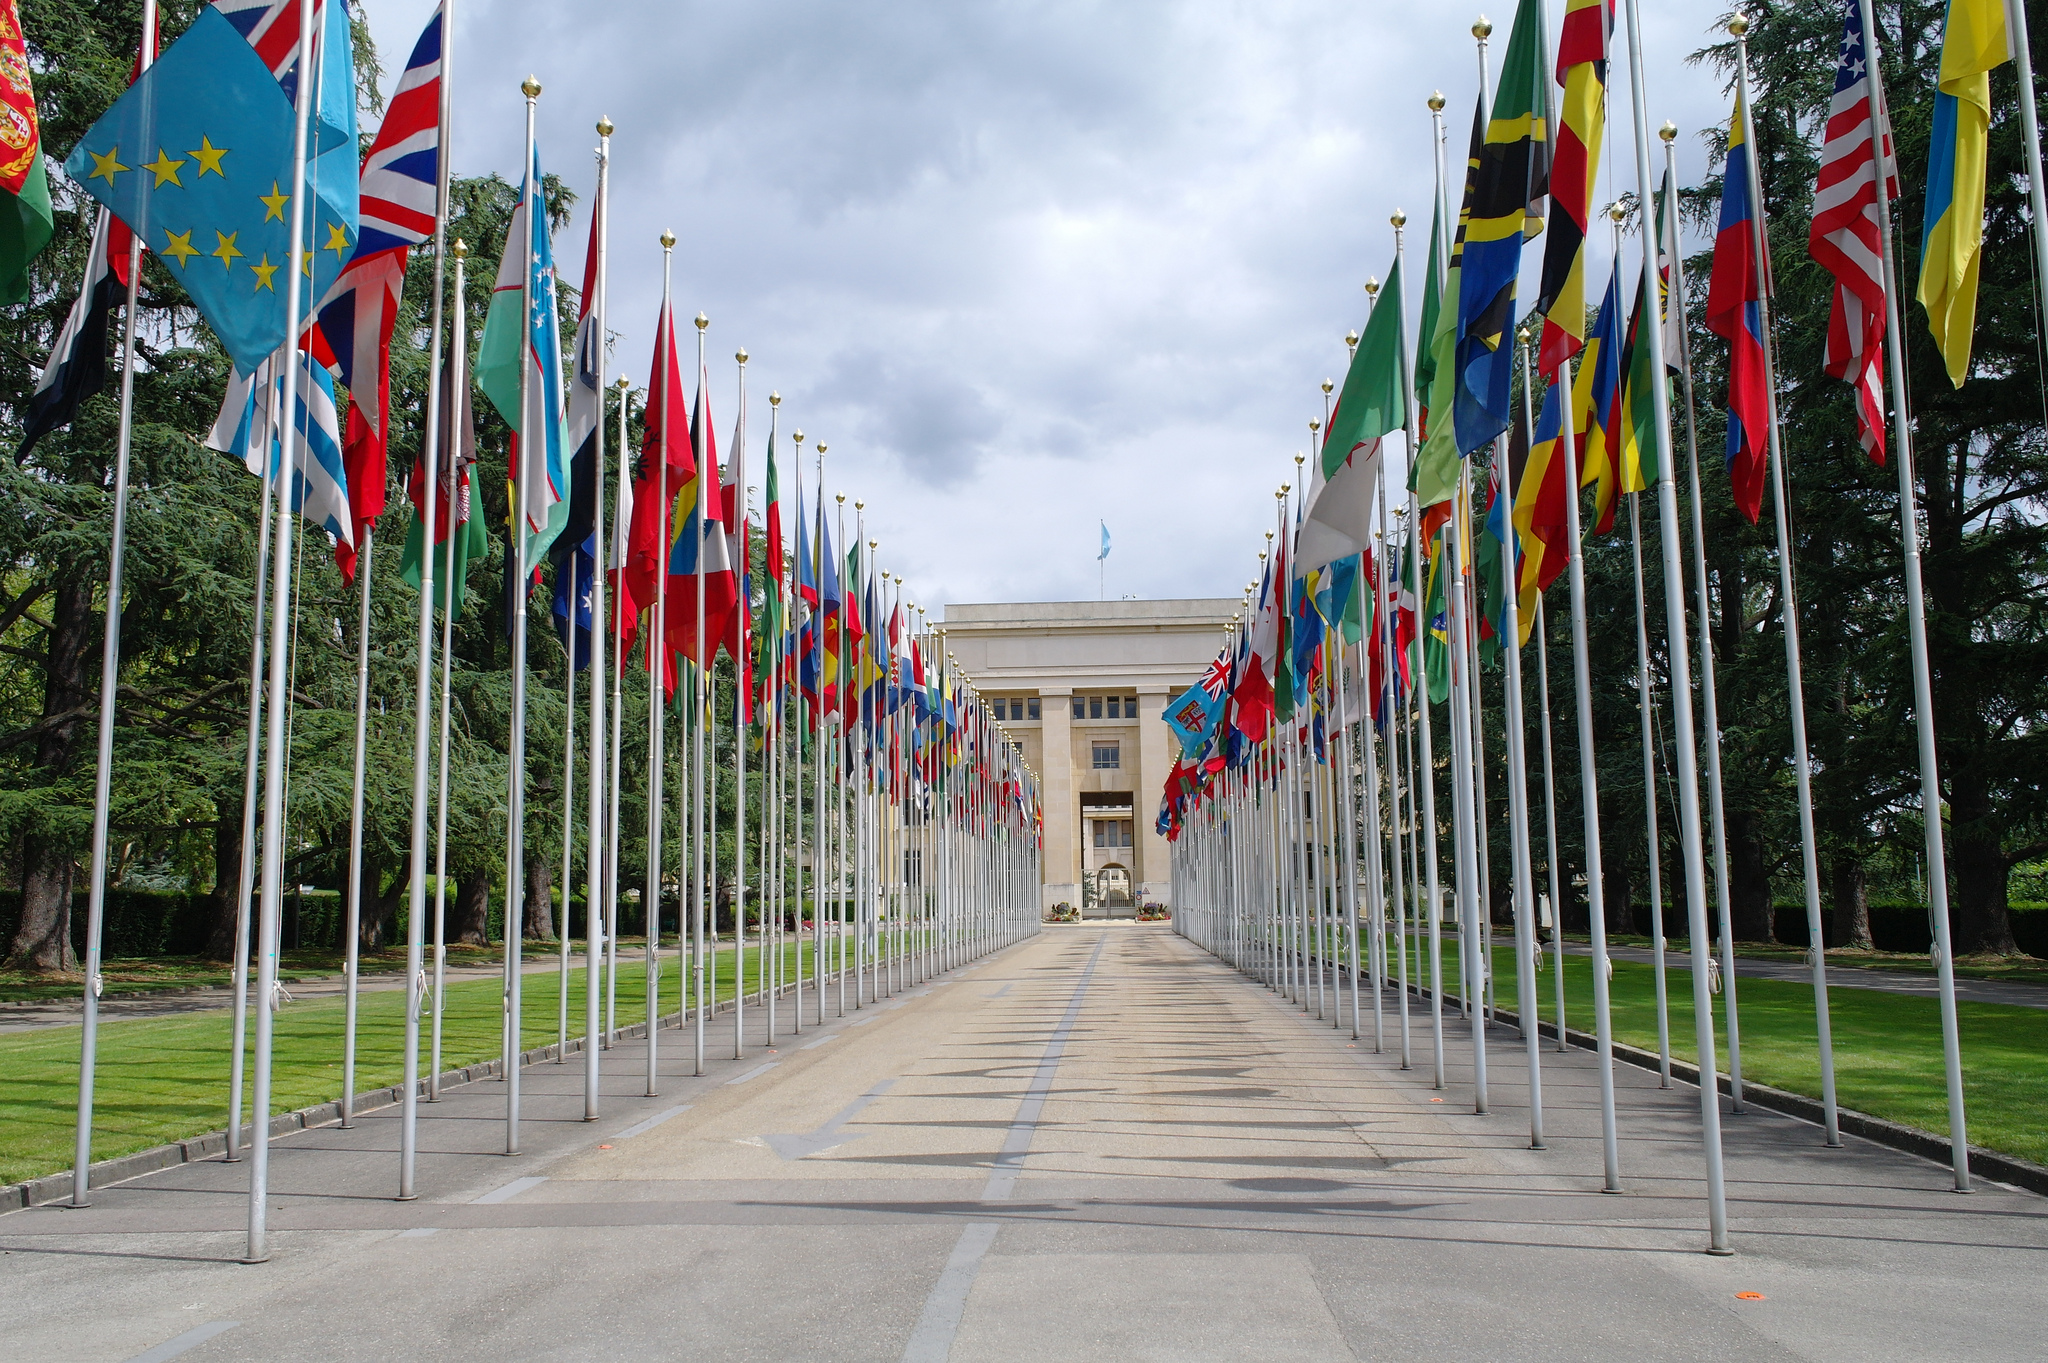 The United Nations Building in Geneva - Captured by Martin Morris